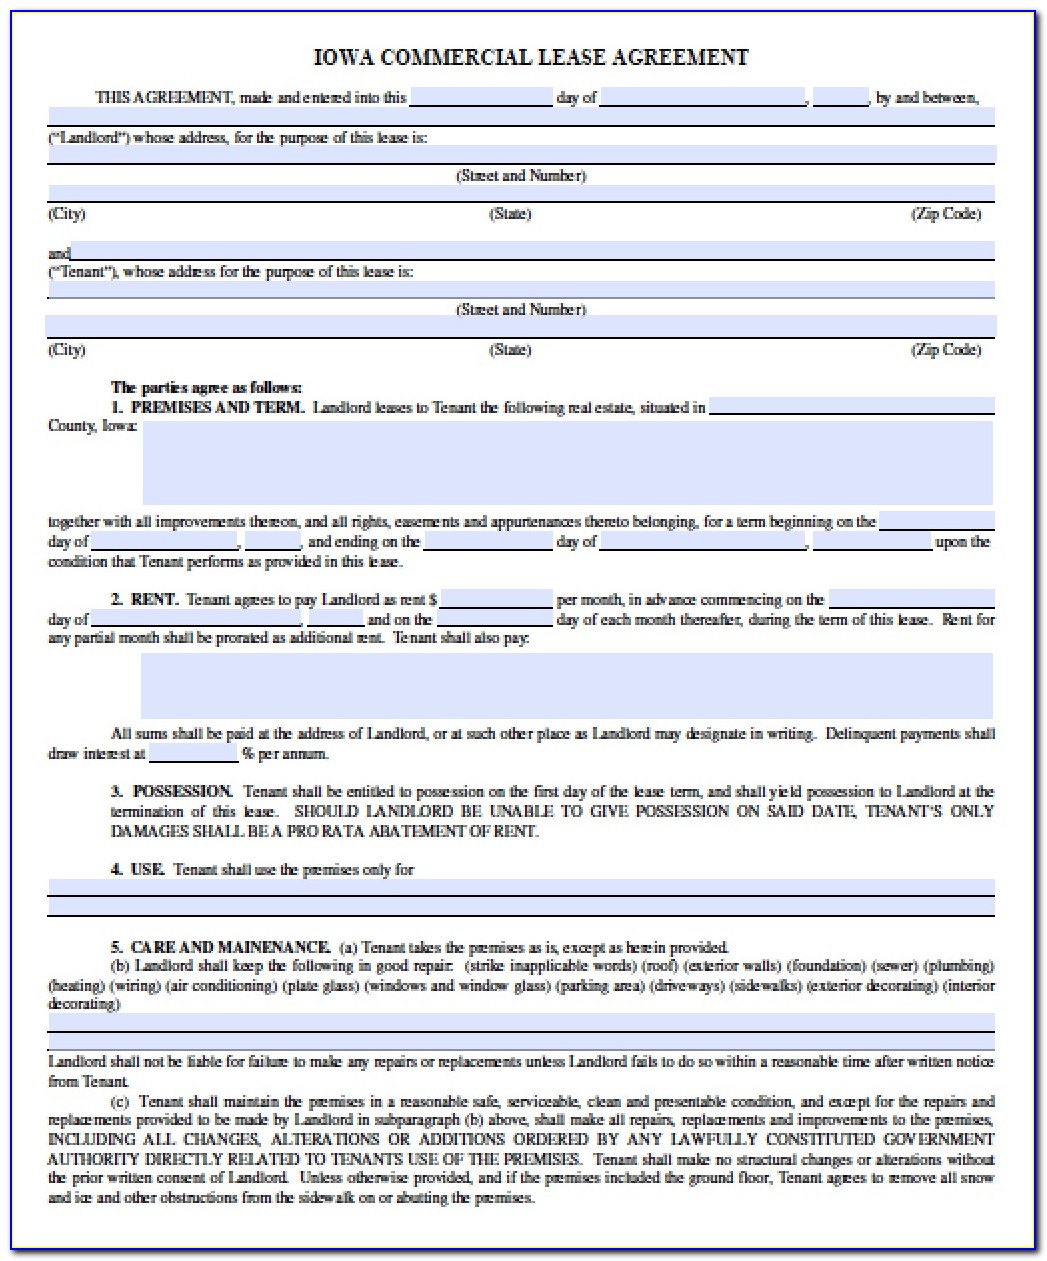 Florida Commercial Lease Agreement Form Pdf